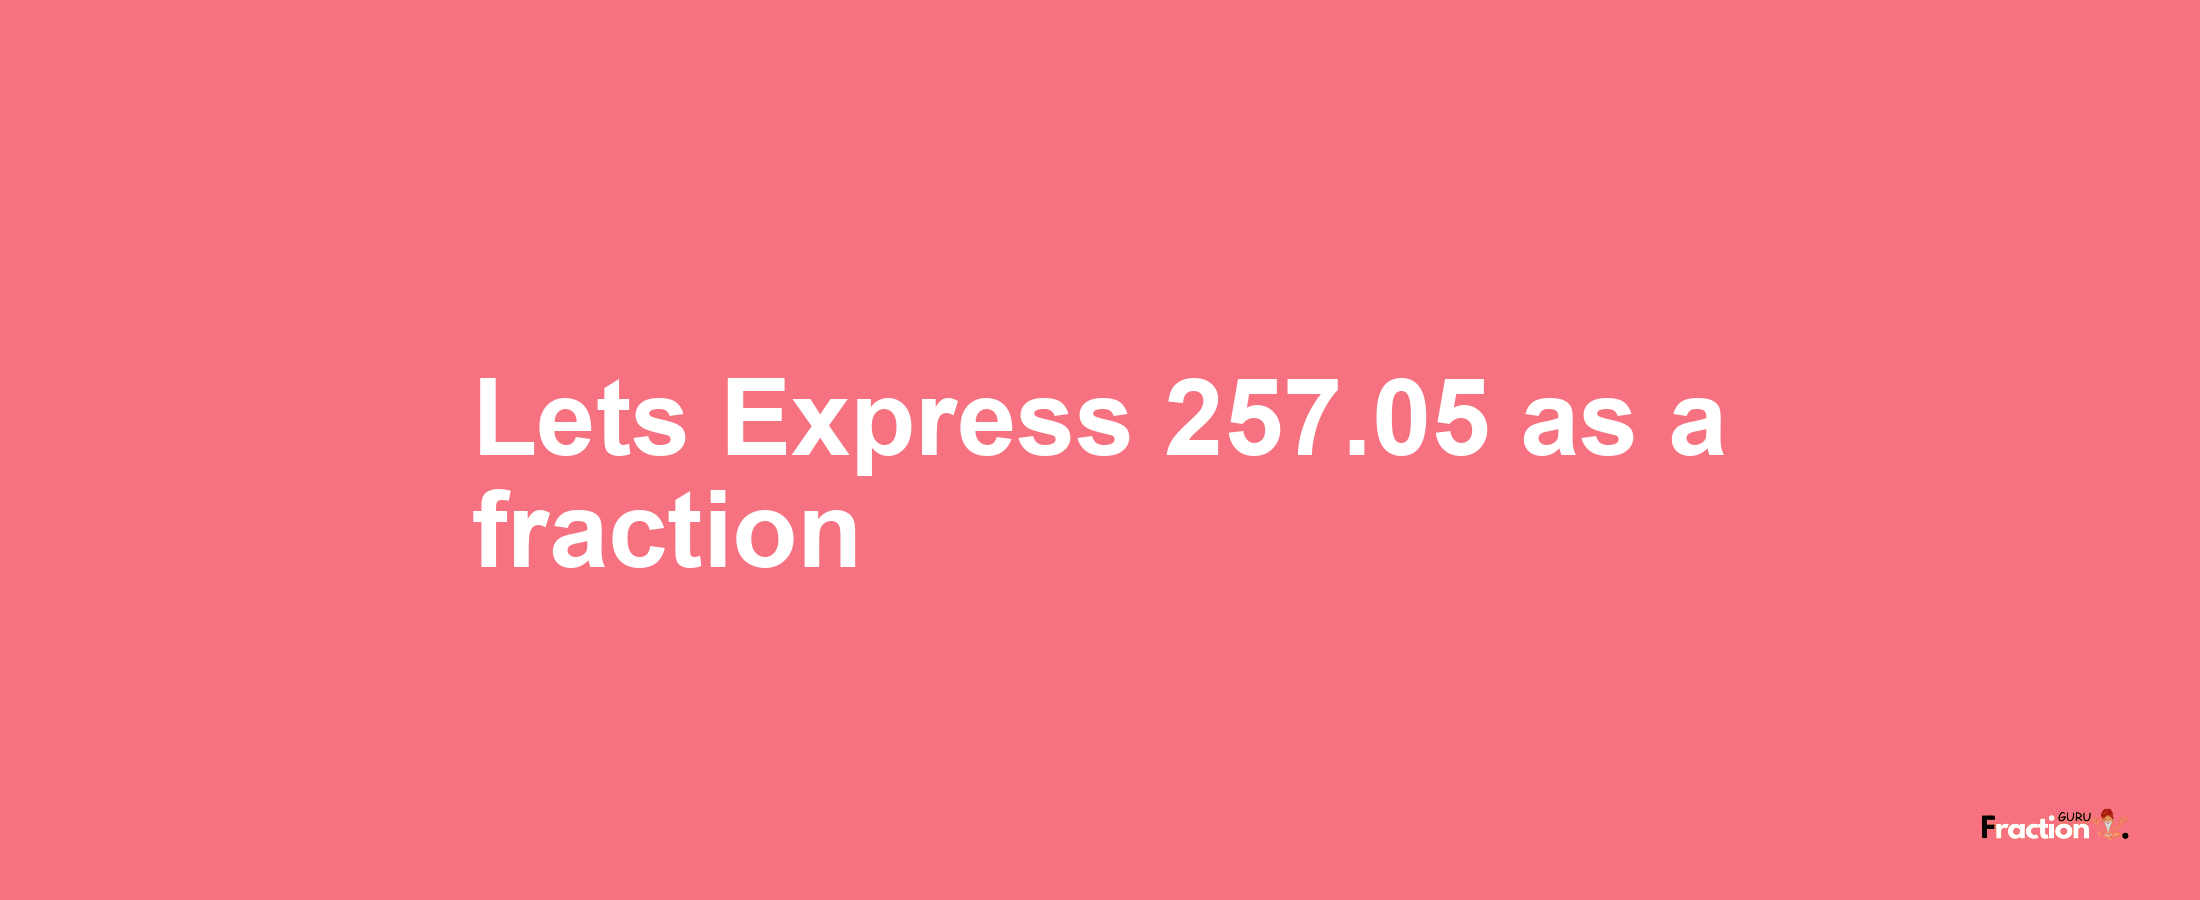 Lets Express 257.05 as afraction